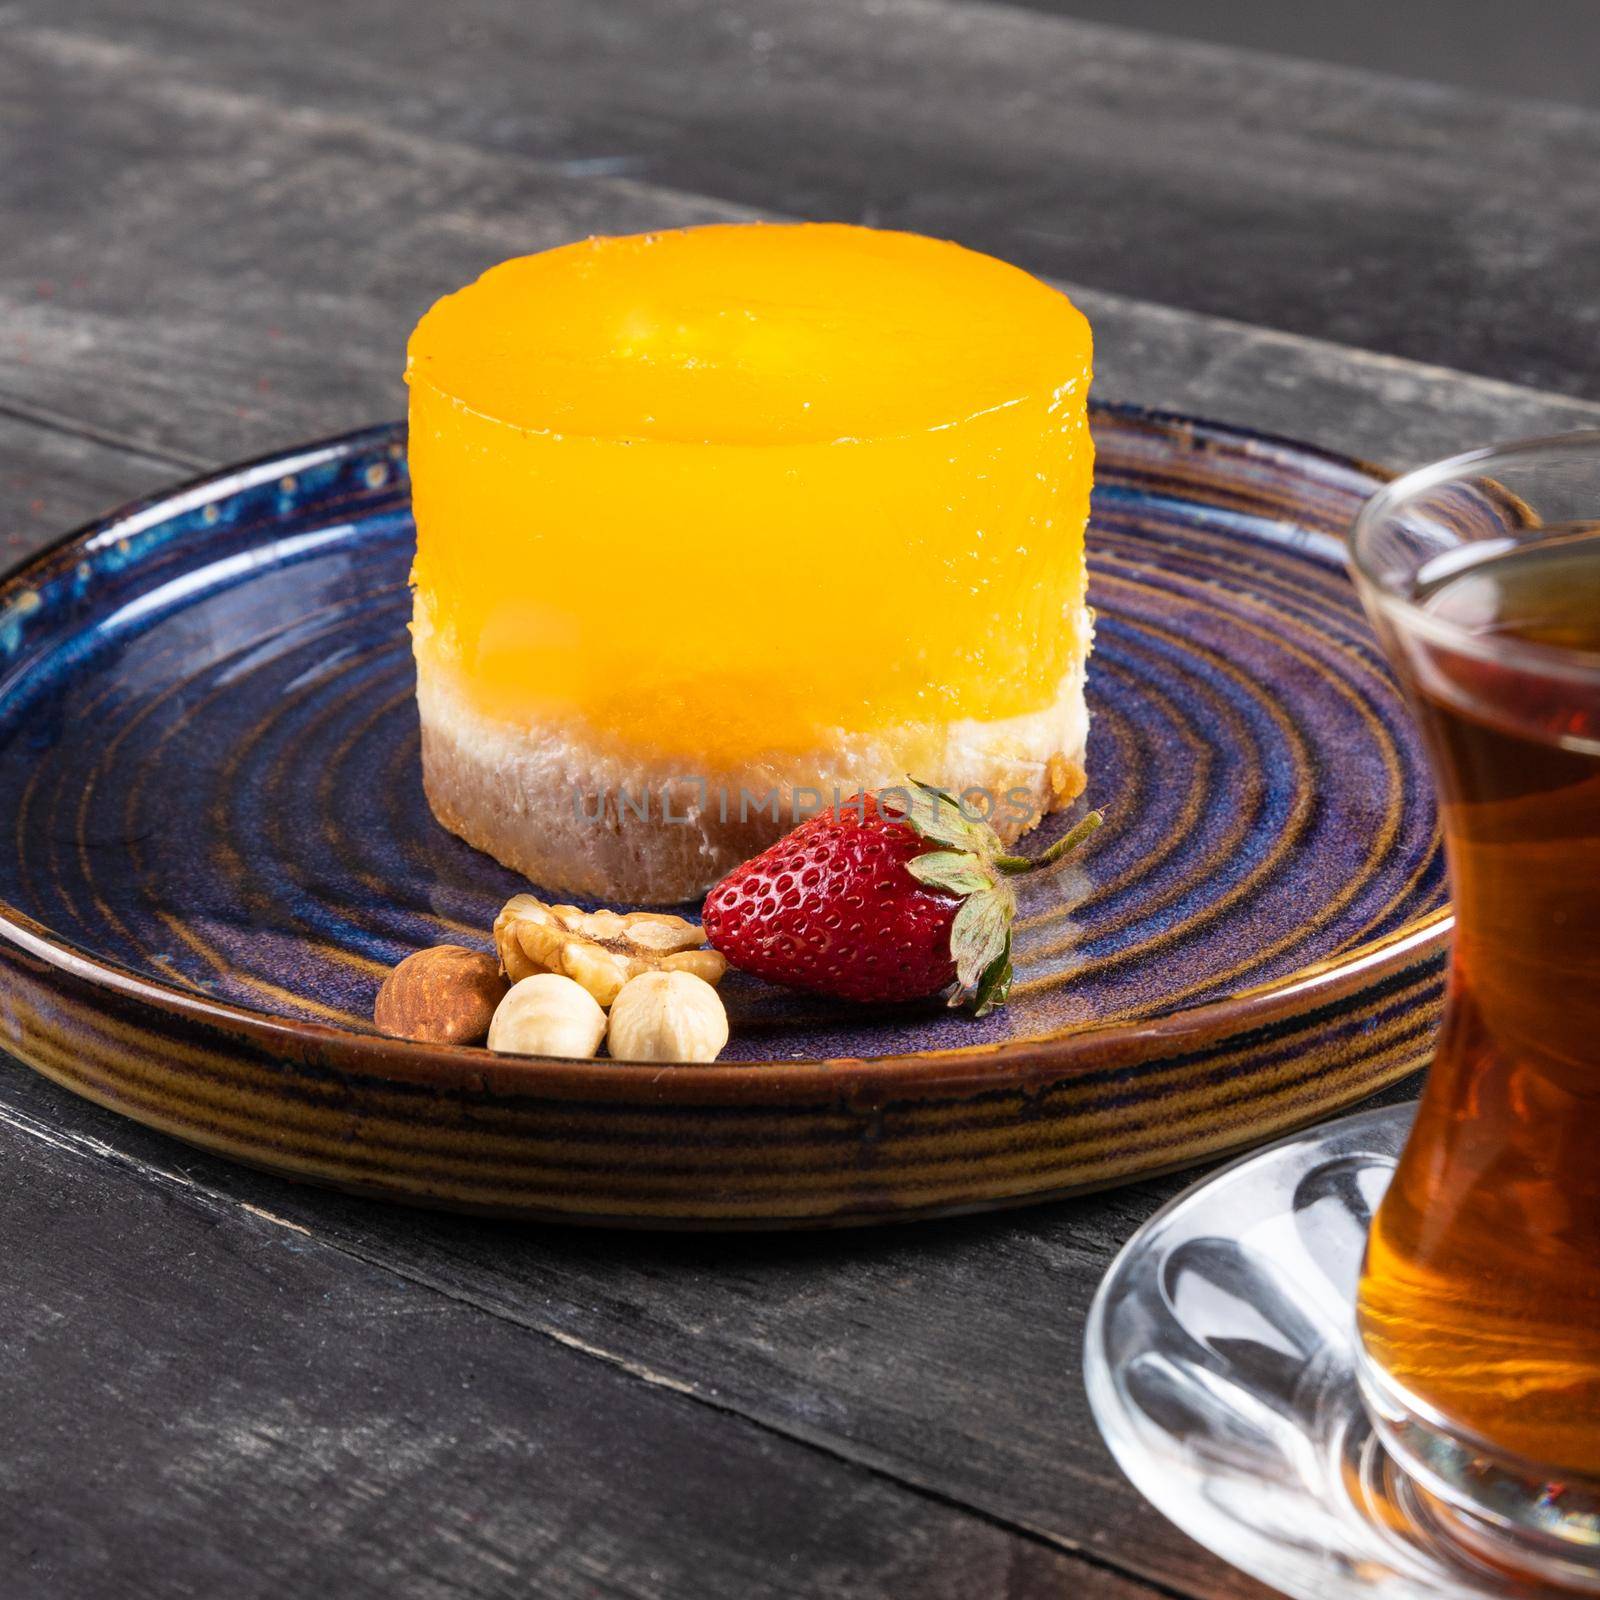 Beautiful yellow dessert with glass of tea by ferhad